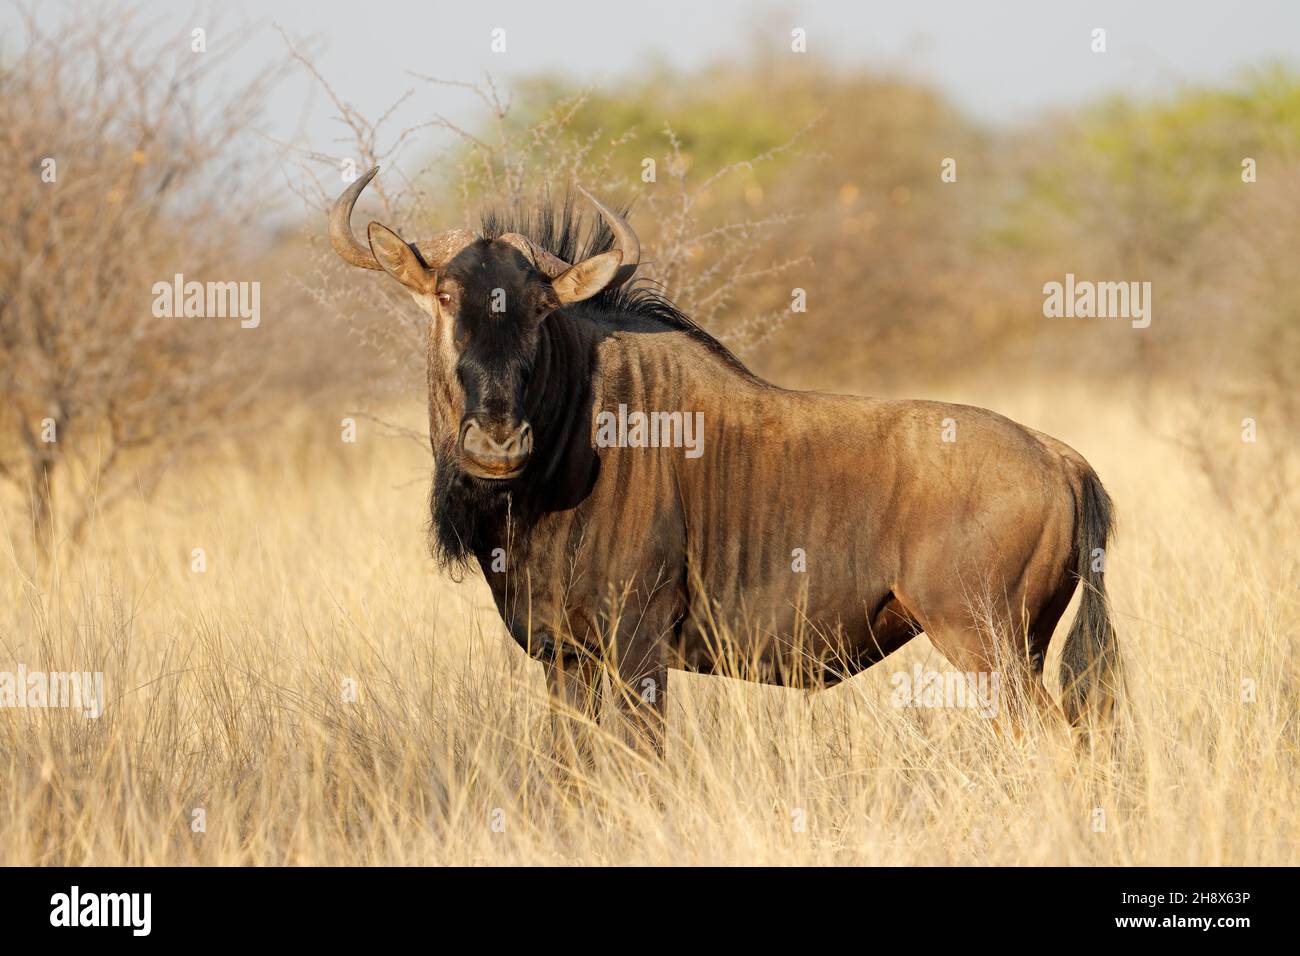 A blue wildebeest (Connochaetes taurinus) in natural habitat, South Africa Stock Photo